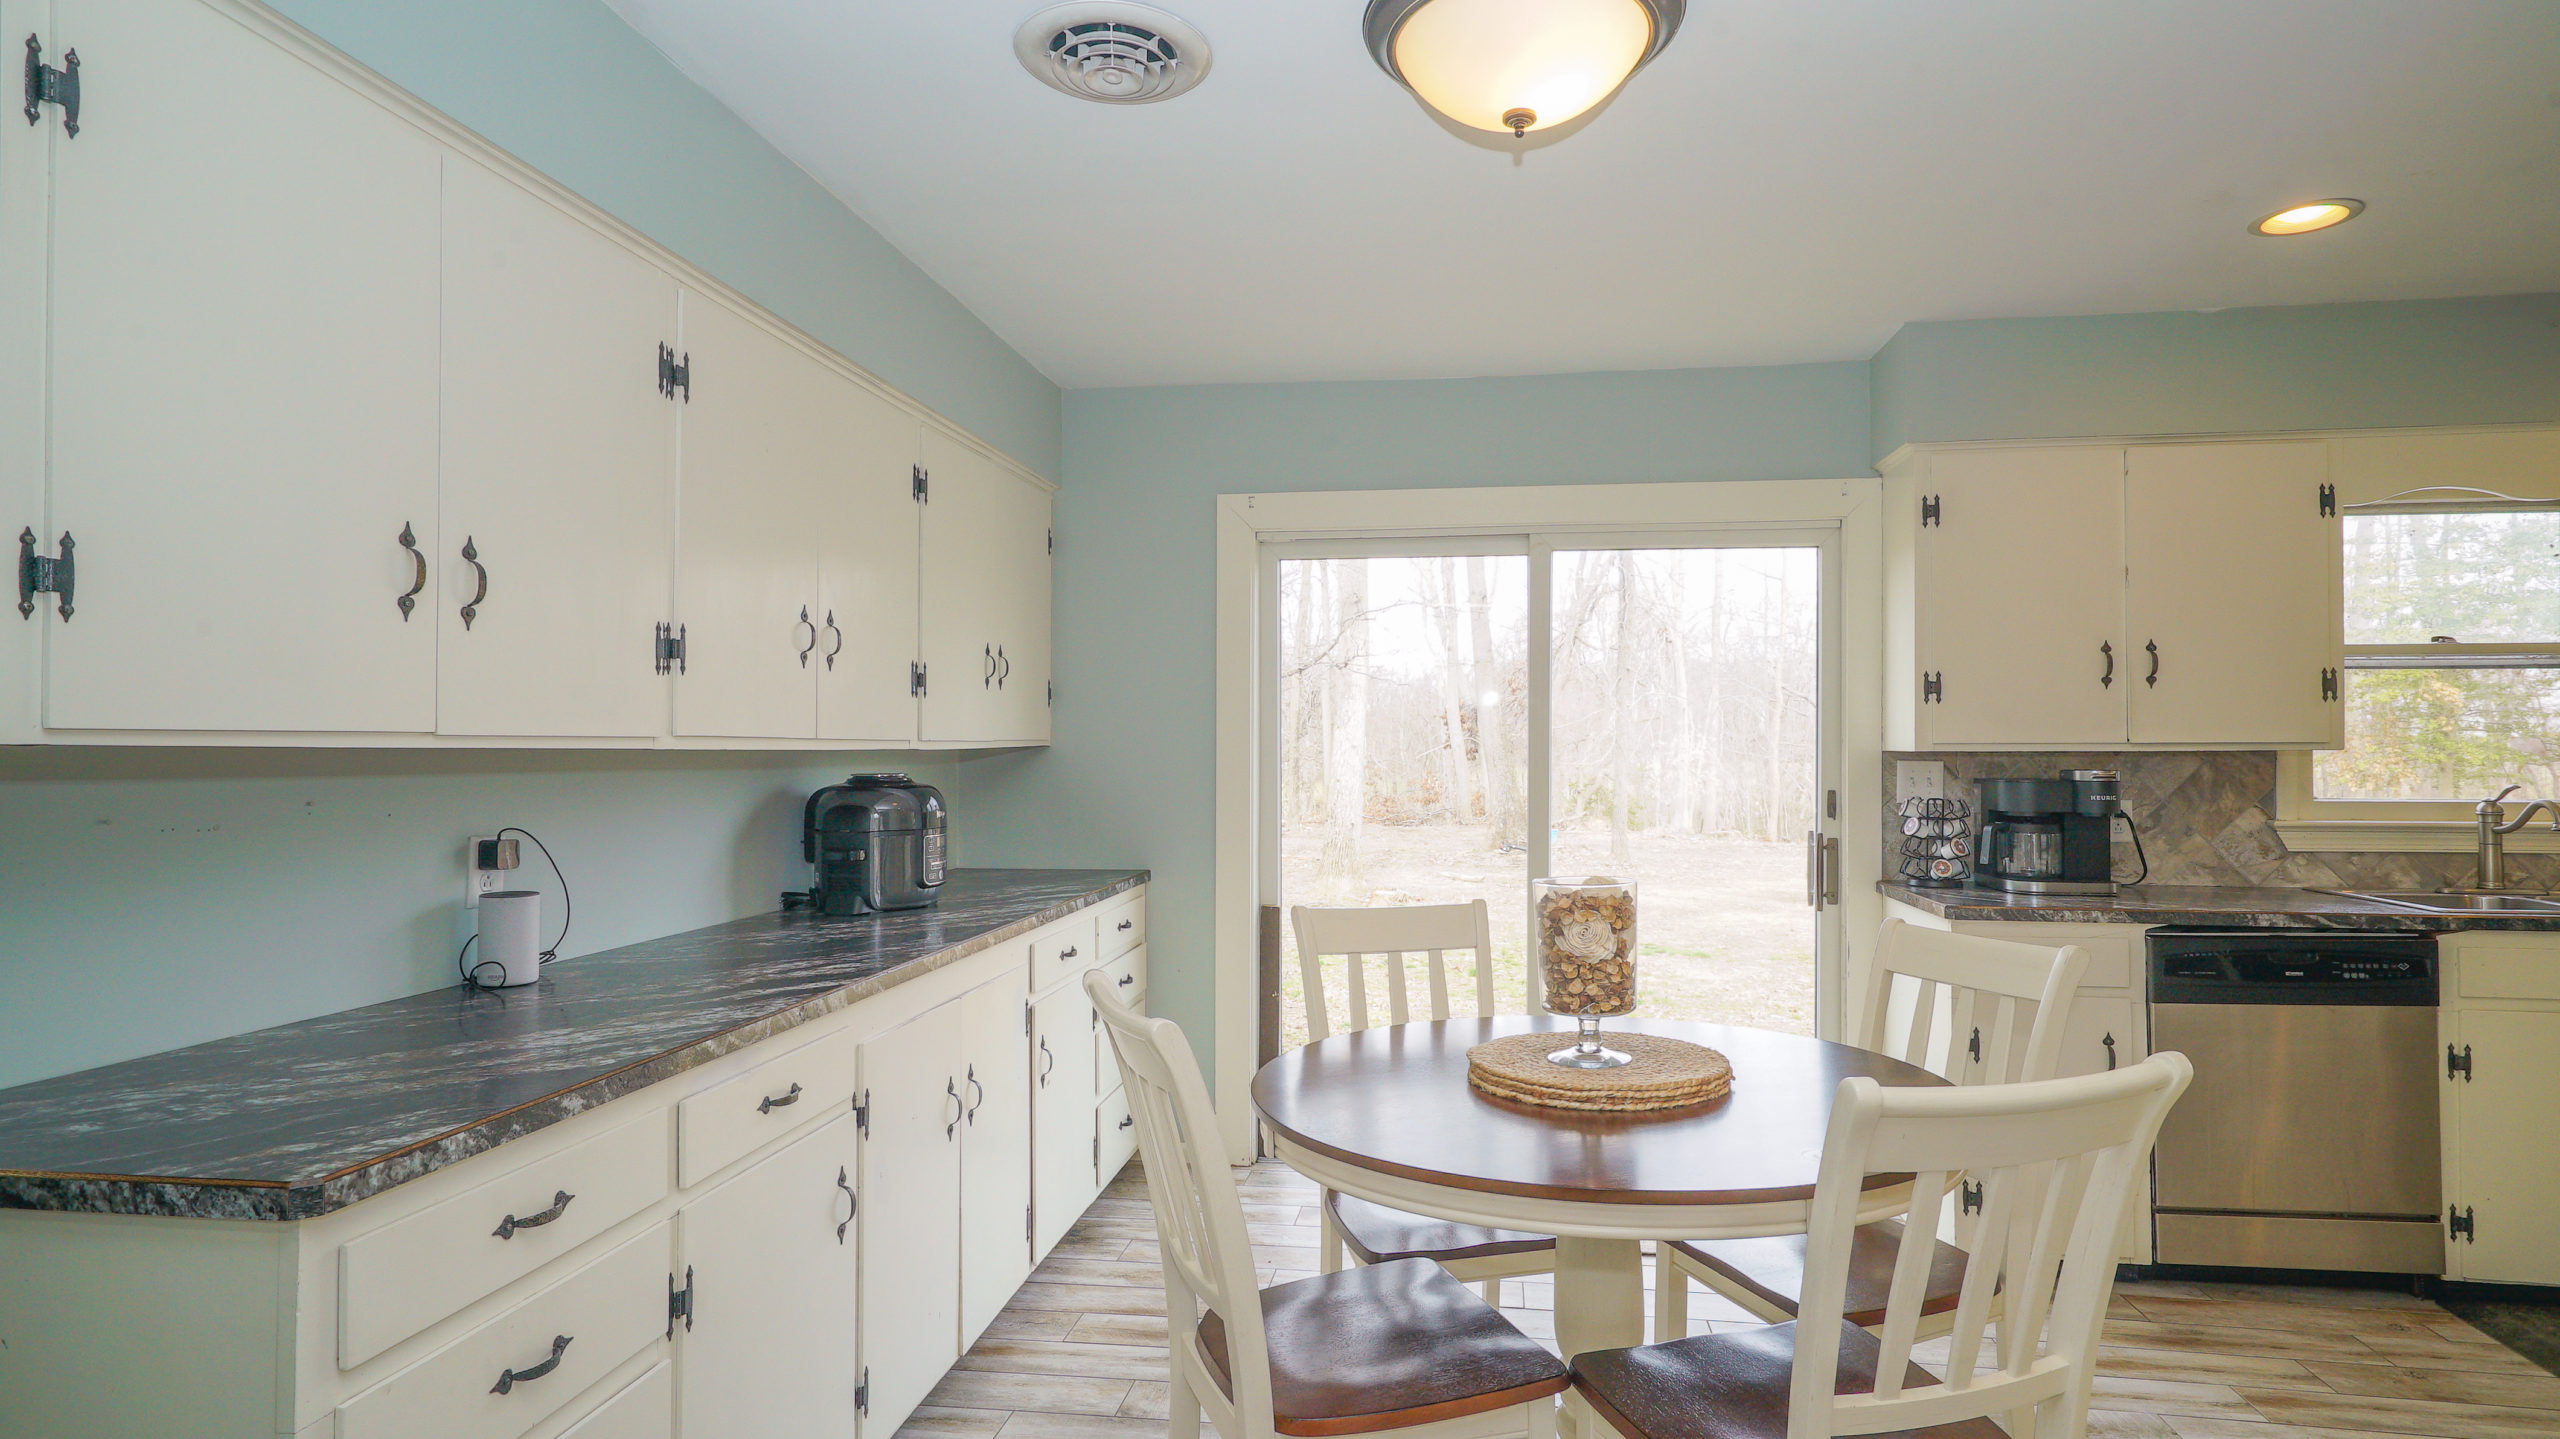 View of Kitchen in House for sale in Chestertown Maryland